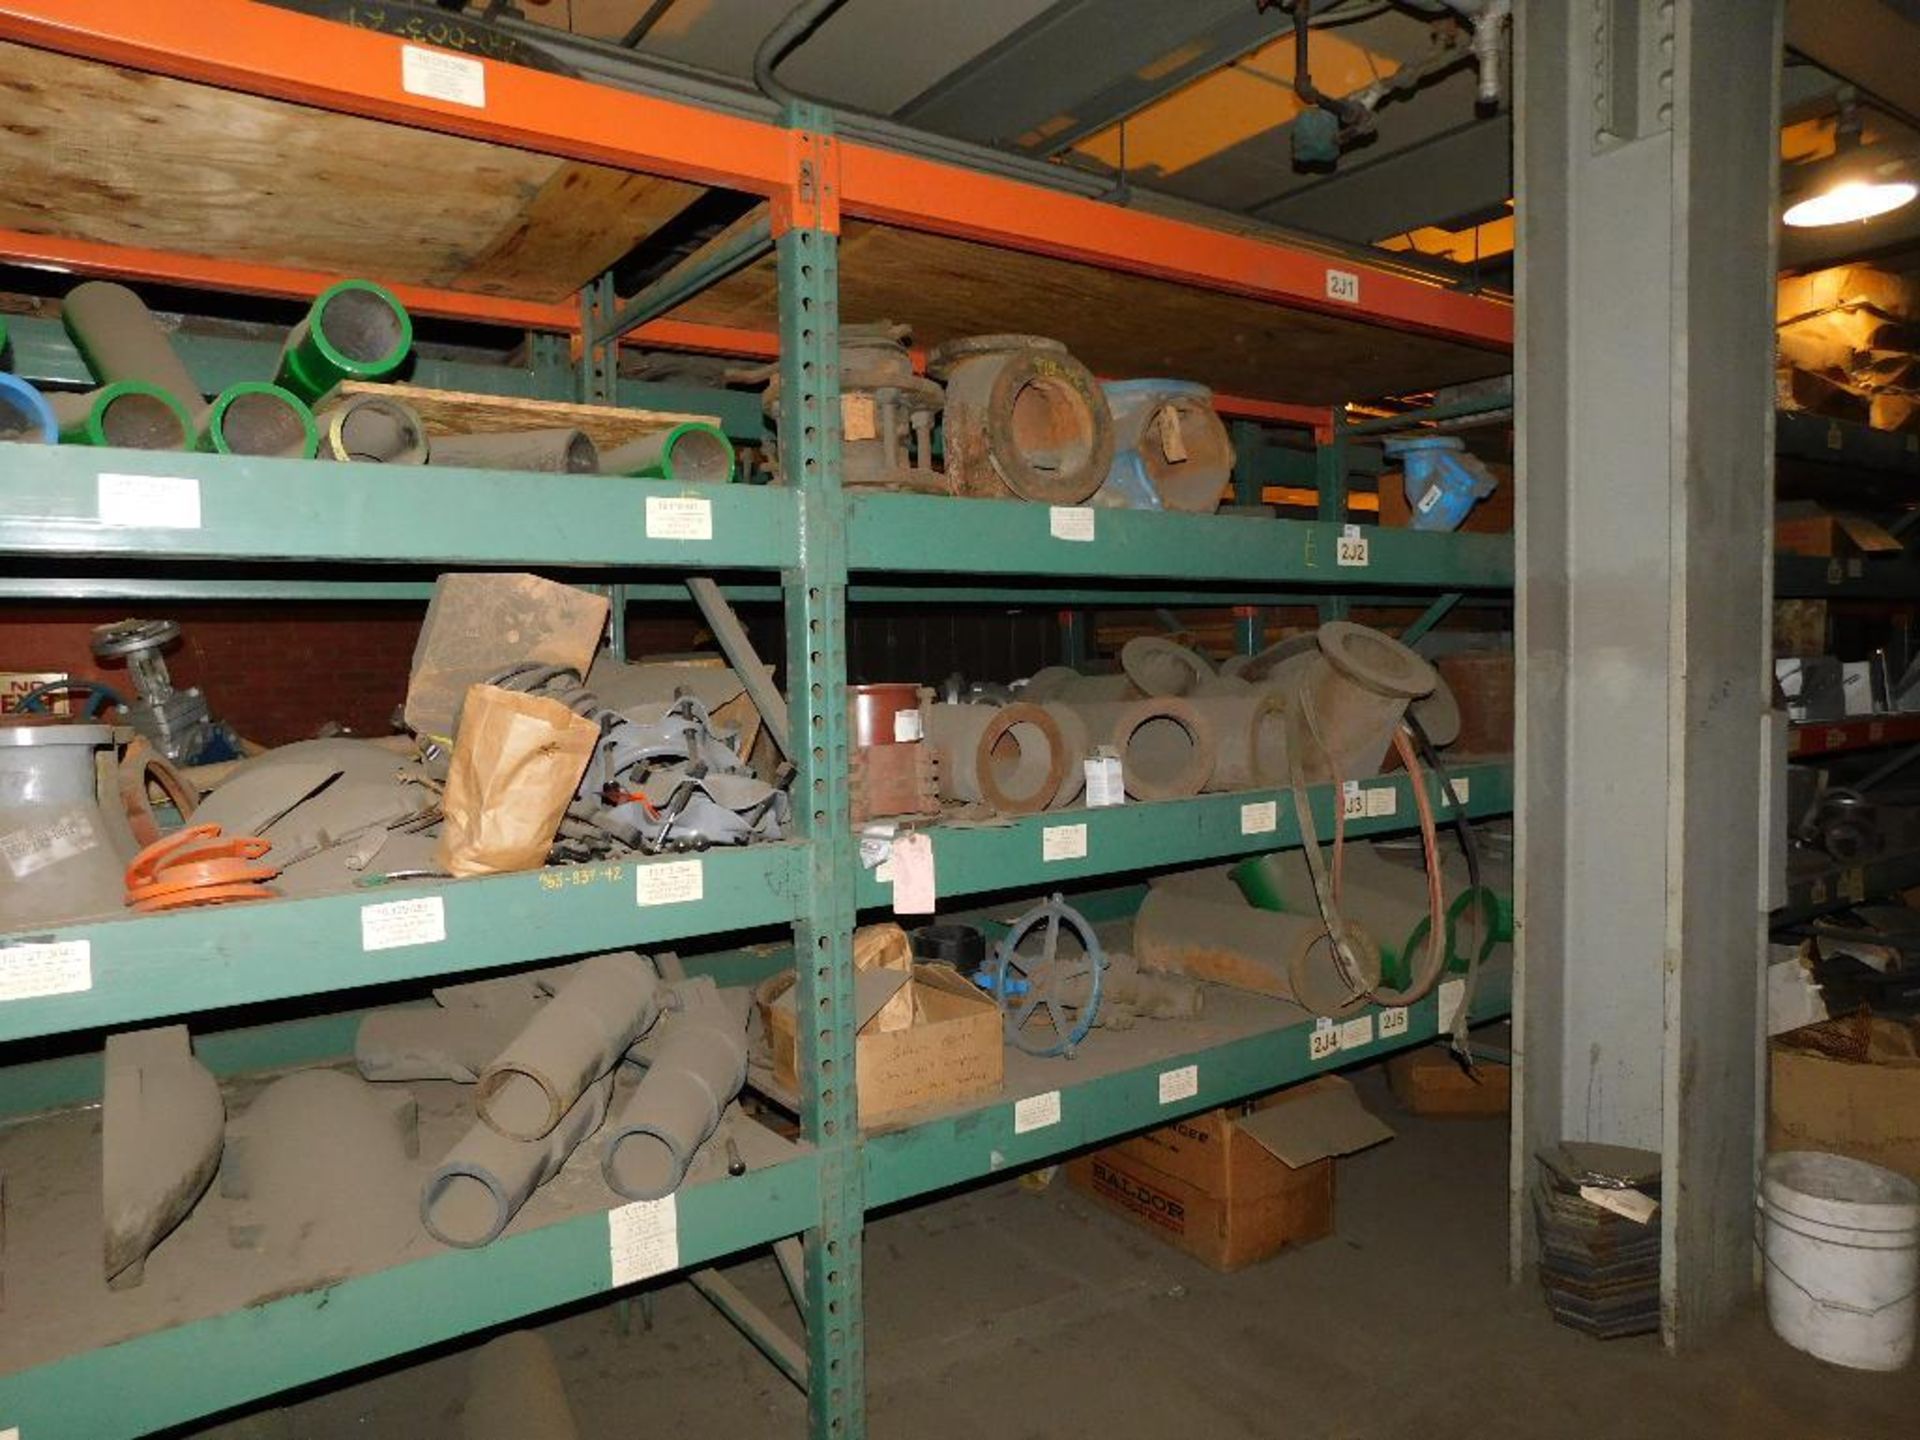 Assortes (2) Ros 8' Pallet Rack with Contents of Conveyor and Pump Parts. - Image 4 of 5